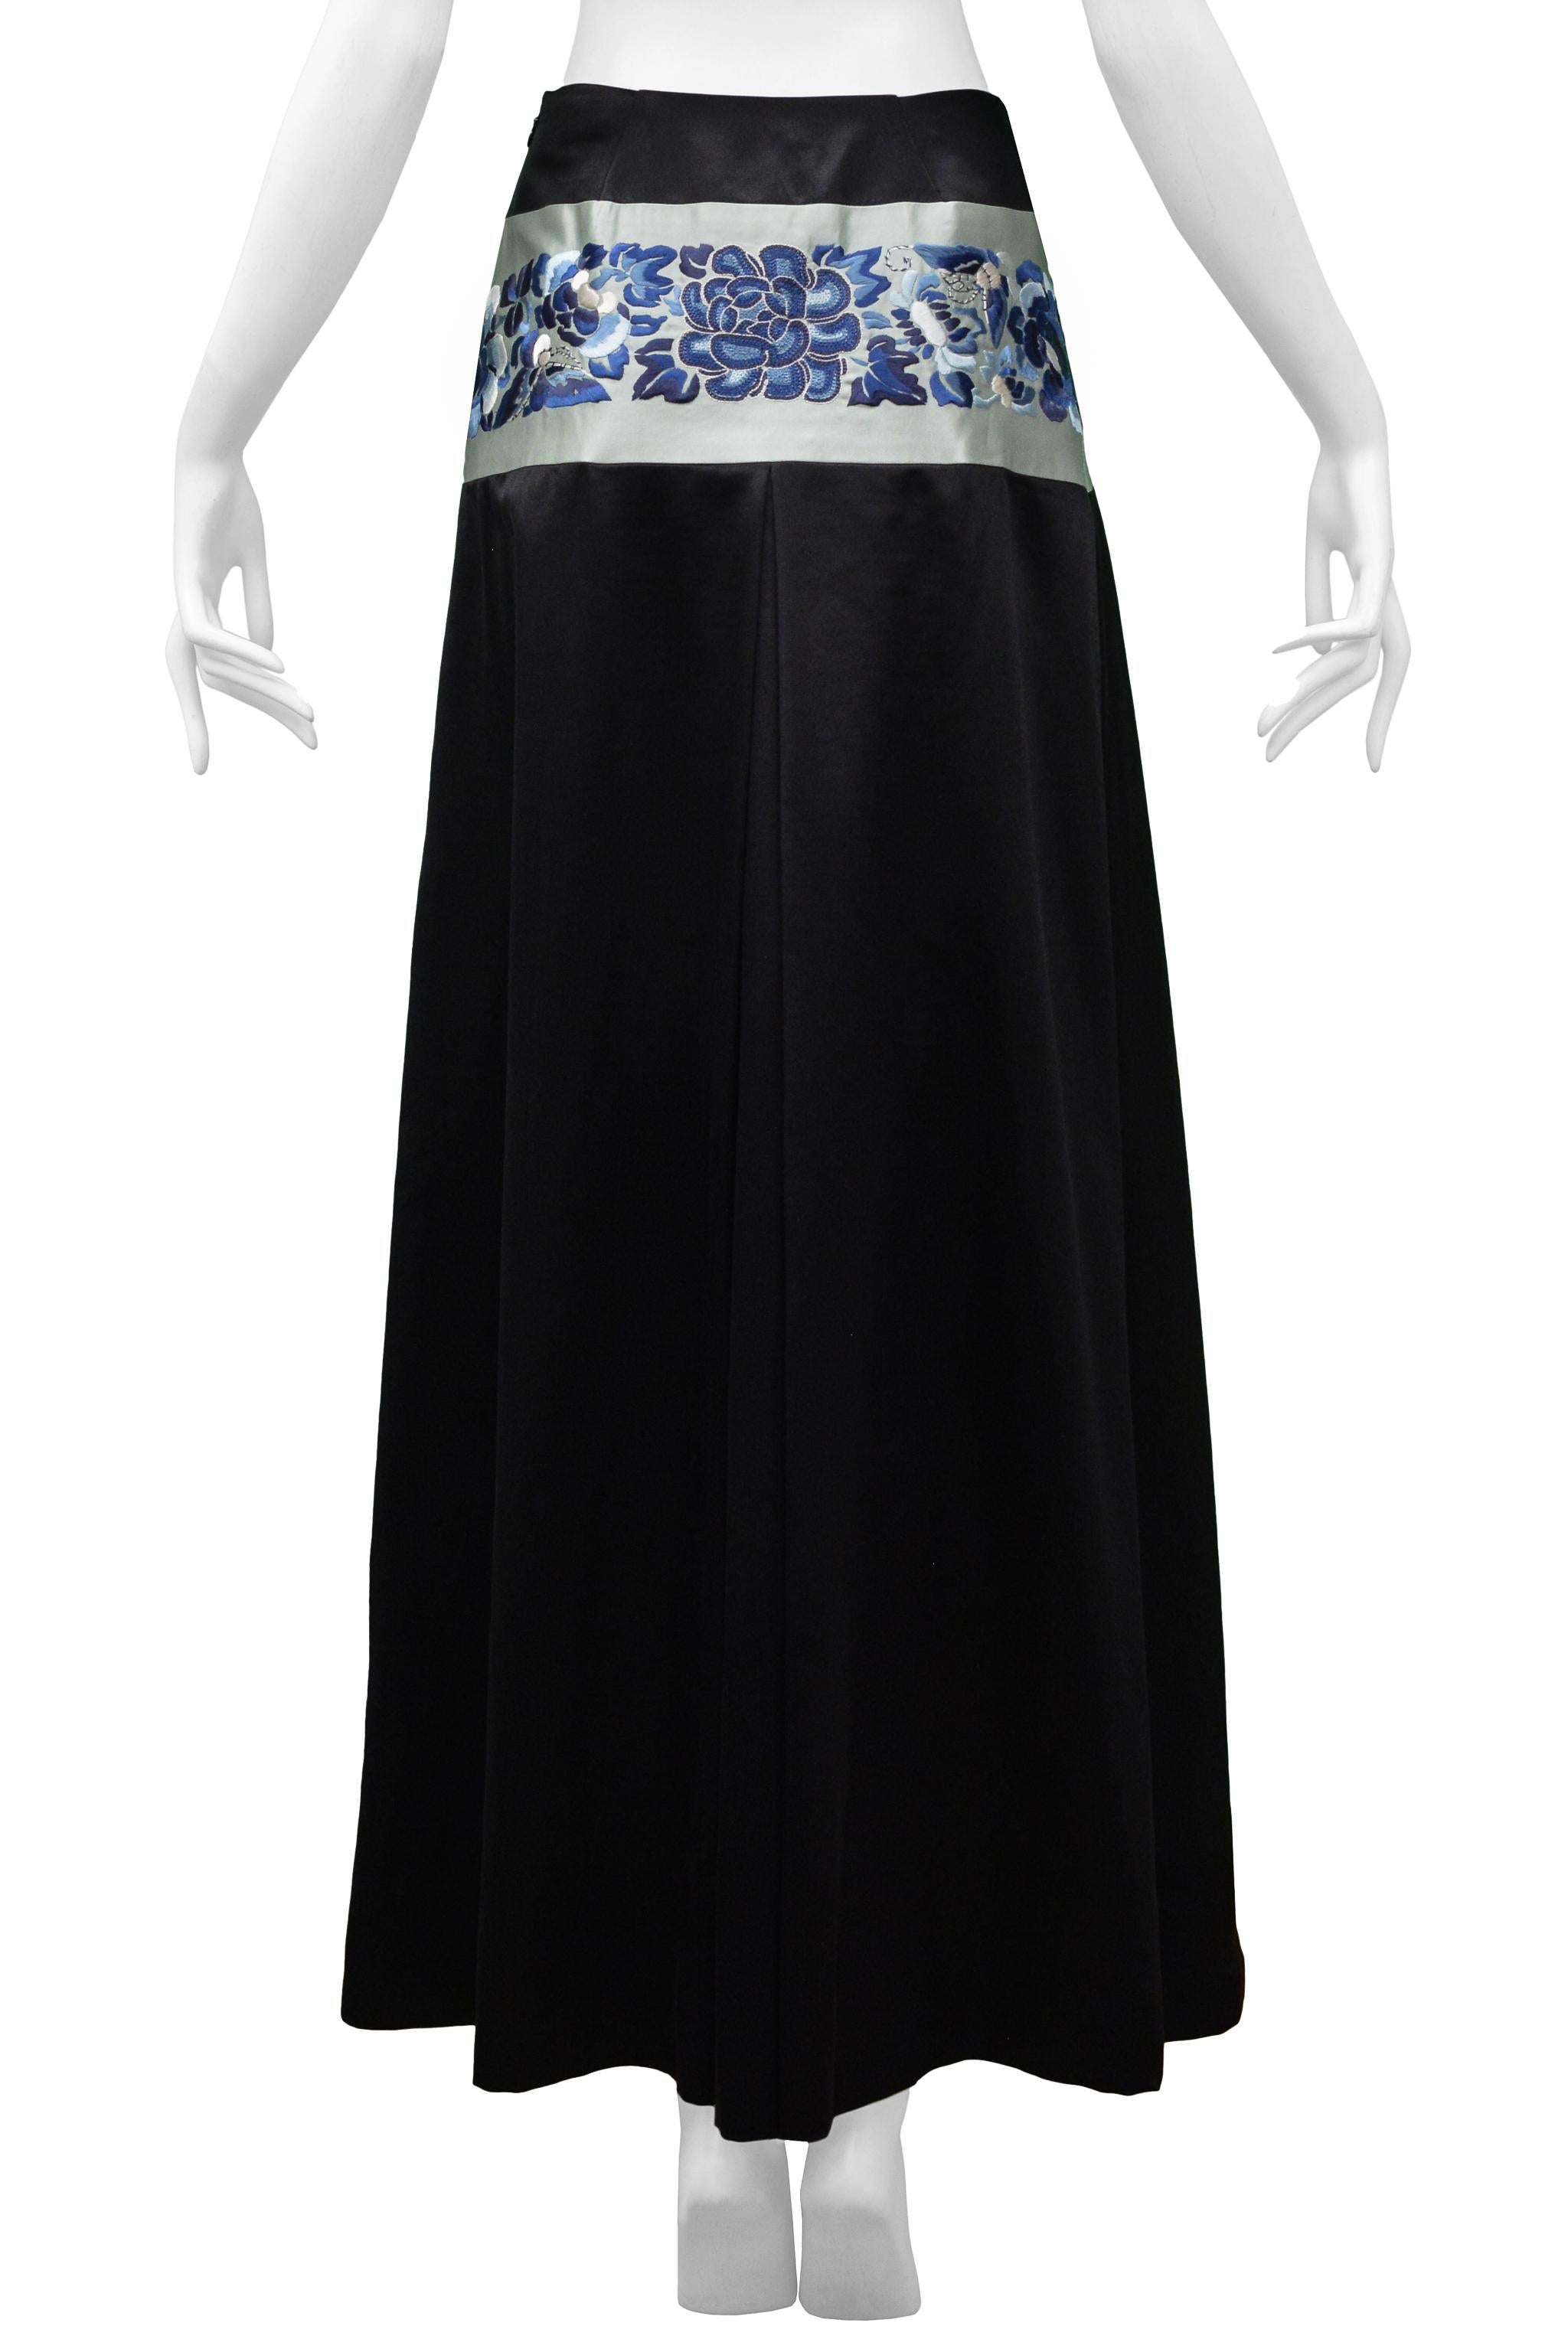 John Galliano Black Satin Maxi Skirt With Blue Floral Asian Inspired Waistband For Sale 1